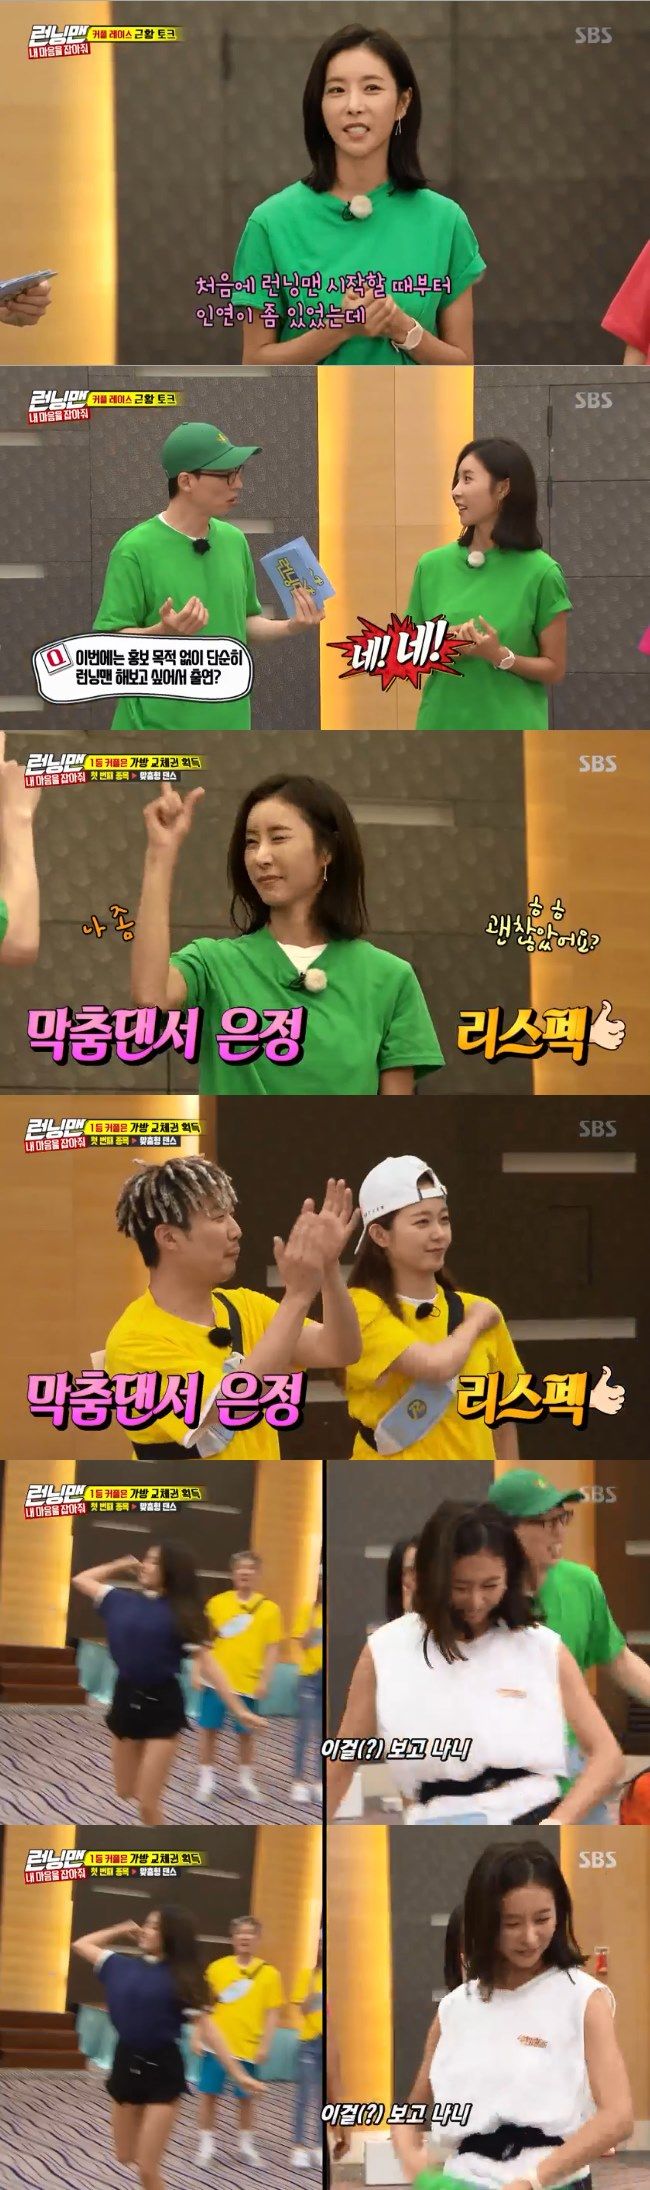 On SBS Running Man broadcasted on the 15th, it was decorated with a summer special couple race.Hwang Chi-yeol - Song Ji-hyo, Han Eun-jung - Yoo Jae-Suk, Bora - Ji Seok-jin, Pyo Ye-jin - Yang Se-chan, Black Pink Jenny - Lee Kwang-soo Index - Kim Jong-guk were paired.While each showed off his talents on the day, he played a battle to dance to the Jesse language. Han Eun-jung attracted attention with his own sexy.Throwing off his clothes, he surprised the surroundings and caused a laugh with the sexy dance of Control Irreplaceable You.Yoo Jae-Suk added a laugh by shouting Im going to die of real fun and turn off the music right away; Han Eun-jung was applauded for his unrefined dance.